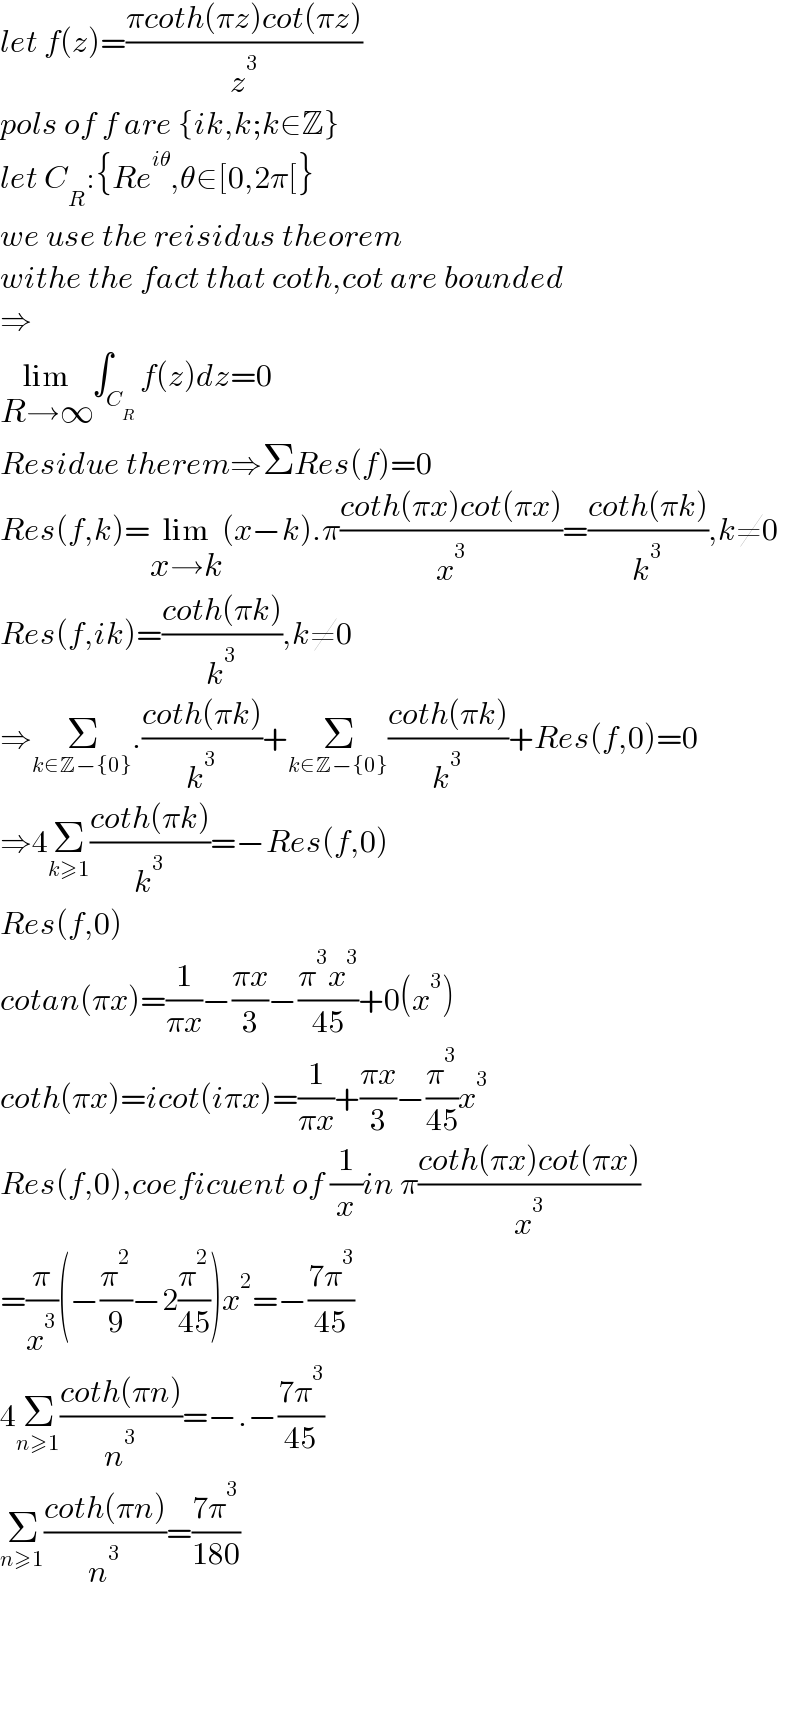 let f(z)=((πcoth(πz)cot(πz))/z^3 )  pols of f are {ik,k;k∈Z}  let C_R :{Re^(iθ) ,θ∈[0,2π[}  we use the reisidus theorem  withe the fact that coth,cot are bounded  ⇒  lim_(R→∞) ∫_C_R  f(z)dz=0  Residue therem⇒ΣRes(f)=0  Res(f,k)=lim_(x→k) (x−k).π((coth(πx)cot(πx))/x^3 )=((coth(πk))/k^3 ),k≠0  Res(f,ik)=((coth(πk))/k^3 ),k≠0  ⇒Σ_(k∈Z−{0}) .((coth(πk))/k^3 )+Σ_(k∈Z−{0}) ((coth(πk))/k^3 )+Res(f,0)=0  ⇒4Σ_(k≥1) ((coth(πk))/k^3 )=−Res(f,0)  Res(f,0)  cotan(πx)=(1/(πx))−((πx)/3)−((π^3 x^3 )/(45))+0(x^3 )  coth(πx)=icot(iπx)=(1/(πx))+((πx)/3)−(π^3 /(45))x^3   Res(f,0),coeficuent of (1/x)in π((coth(πx)cot(πx))/x^3 )  =(π/x^3 )(−(π^2 /9)−2(π^2 /(45)))x^2 =−((7π^3 )/(45))  4Σ_(n≥1) ((coth(πn))/n^3 )=−.−((7π^3 )/(45))  Σ_(n≥1) ((coth(πn))/n^3 )=((7π^3 )/(180))        